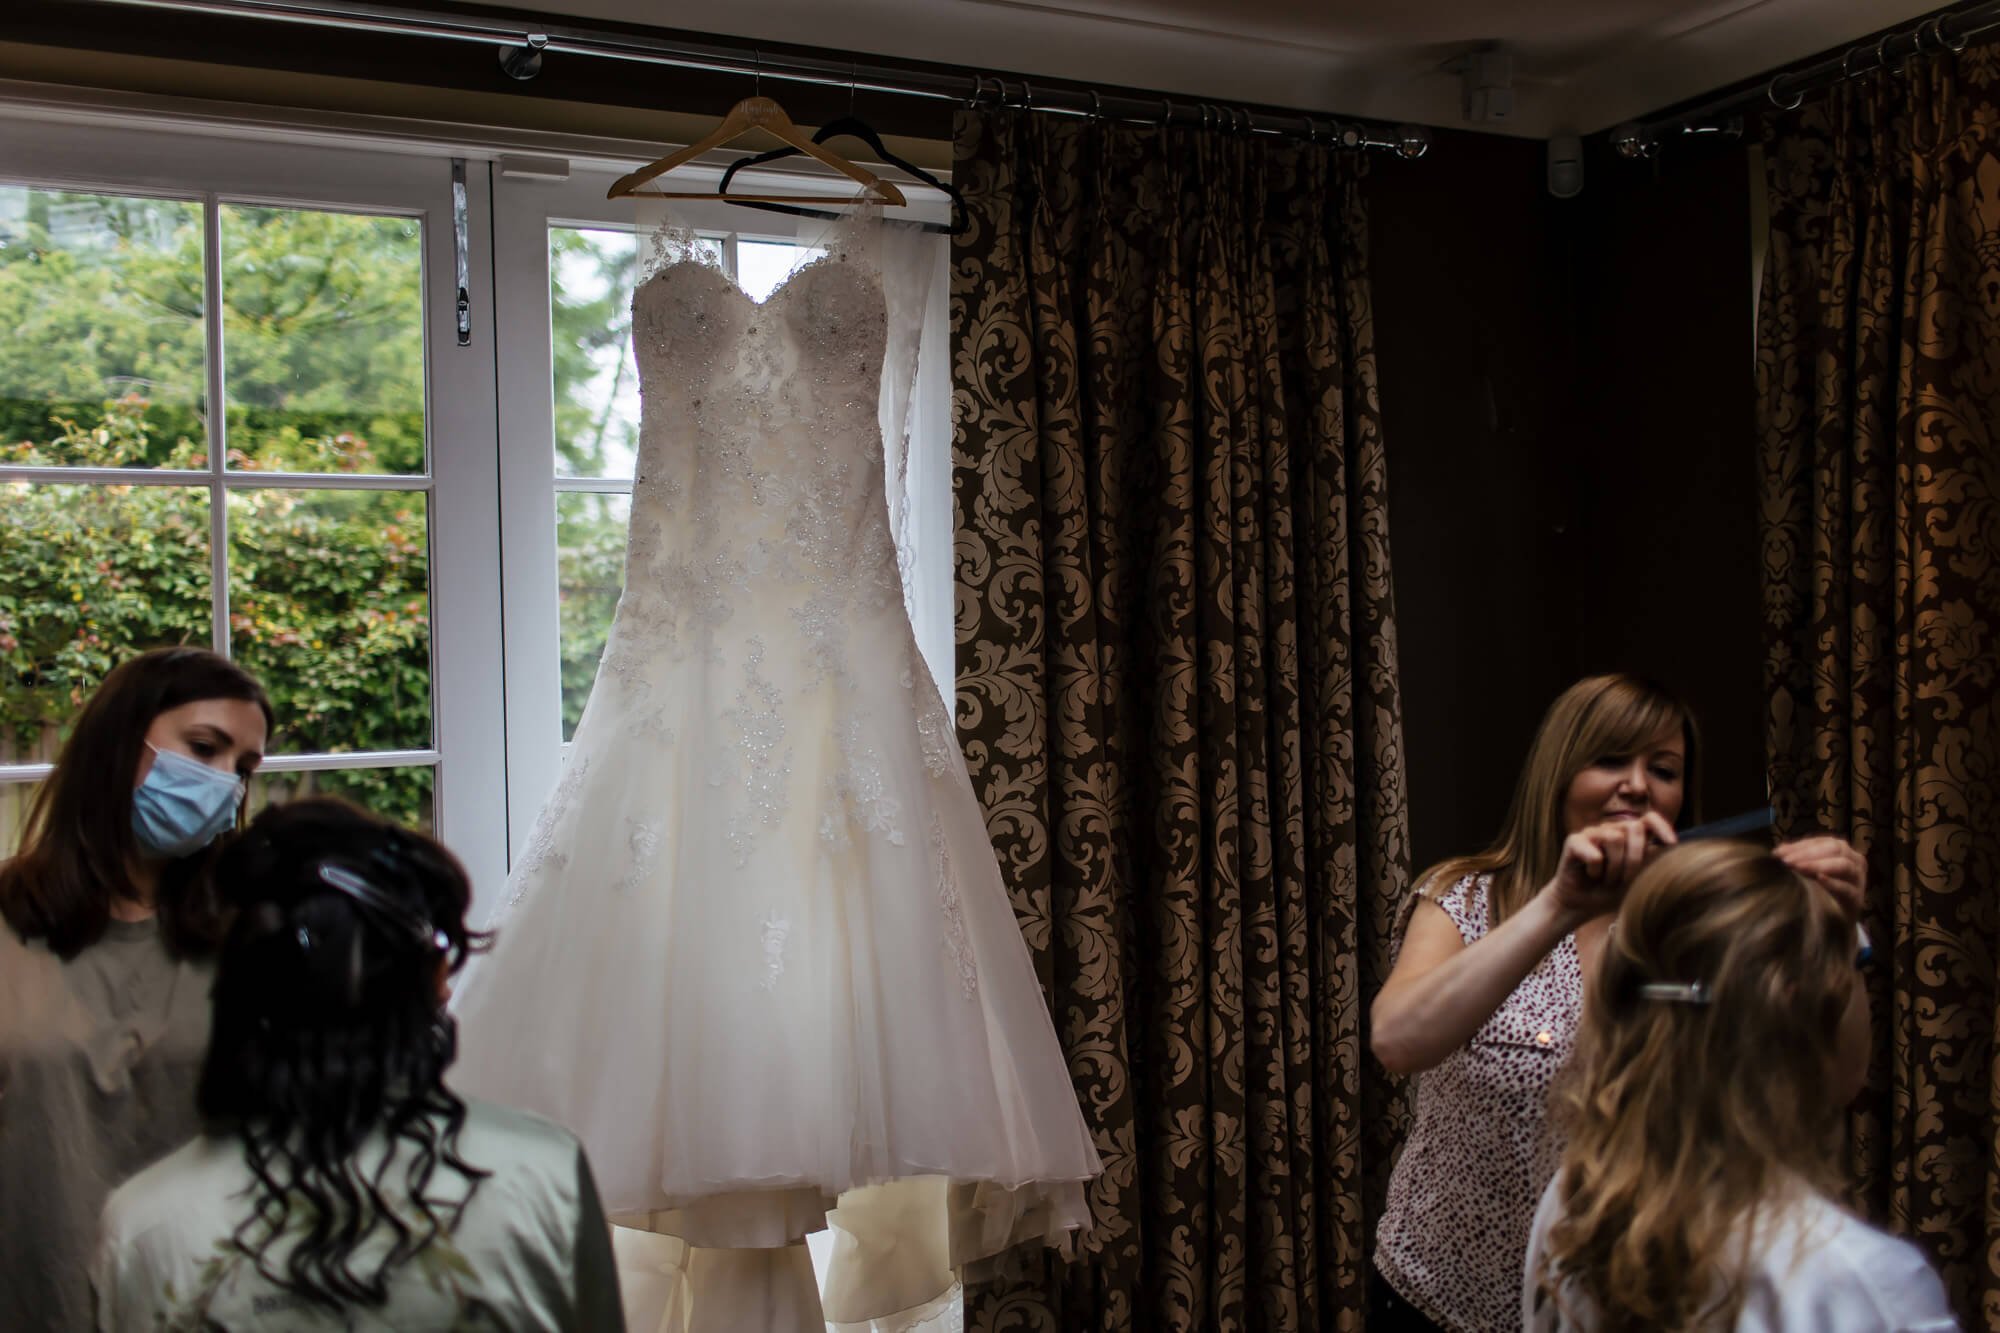 Wedding dress hanging up in the window